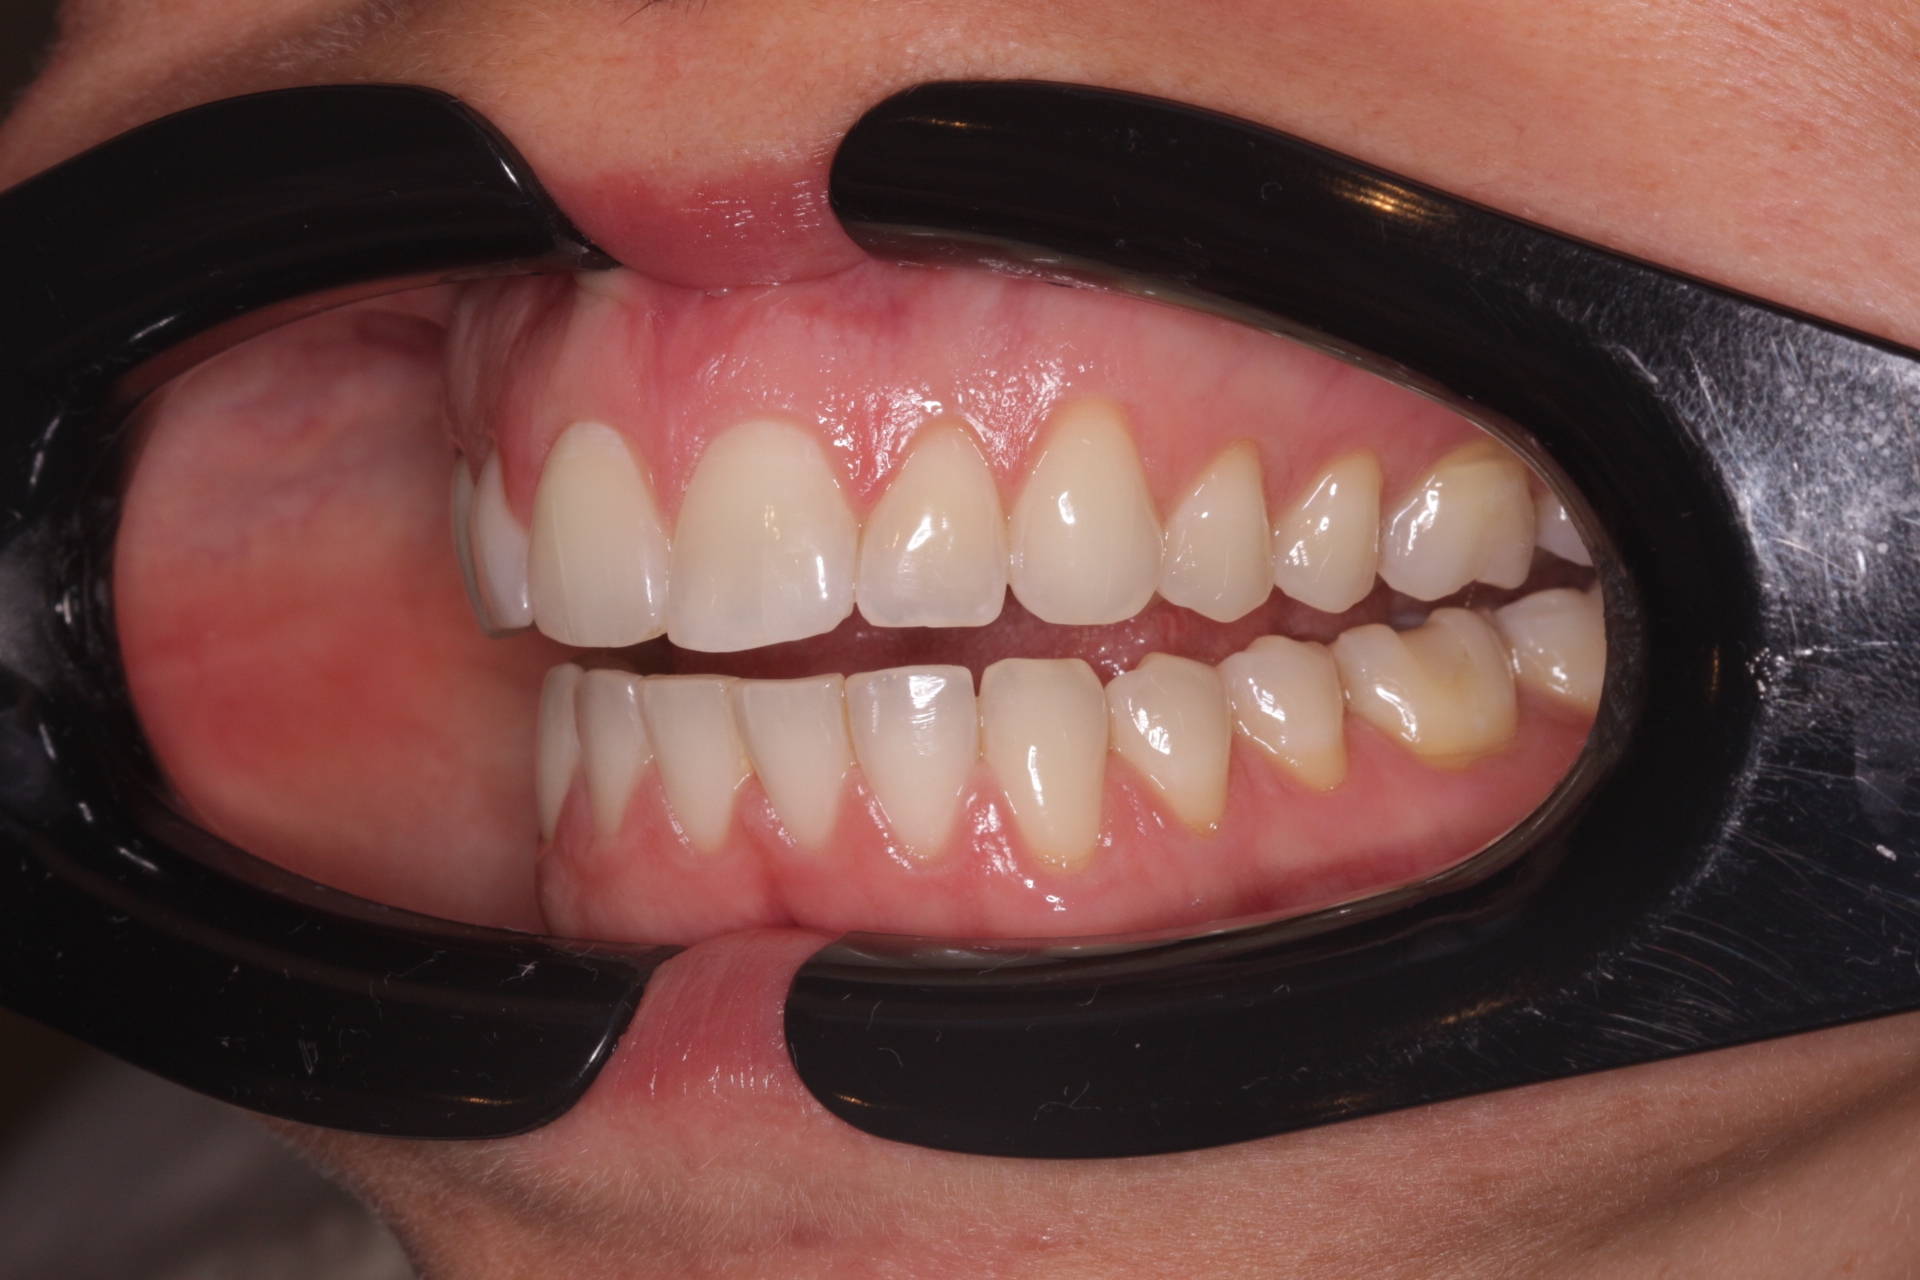 patient with lip retractor revealing teeth and gums